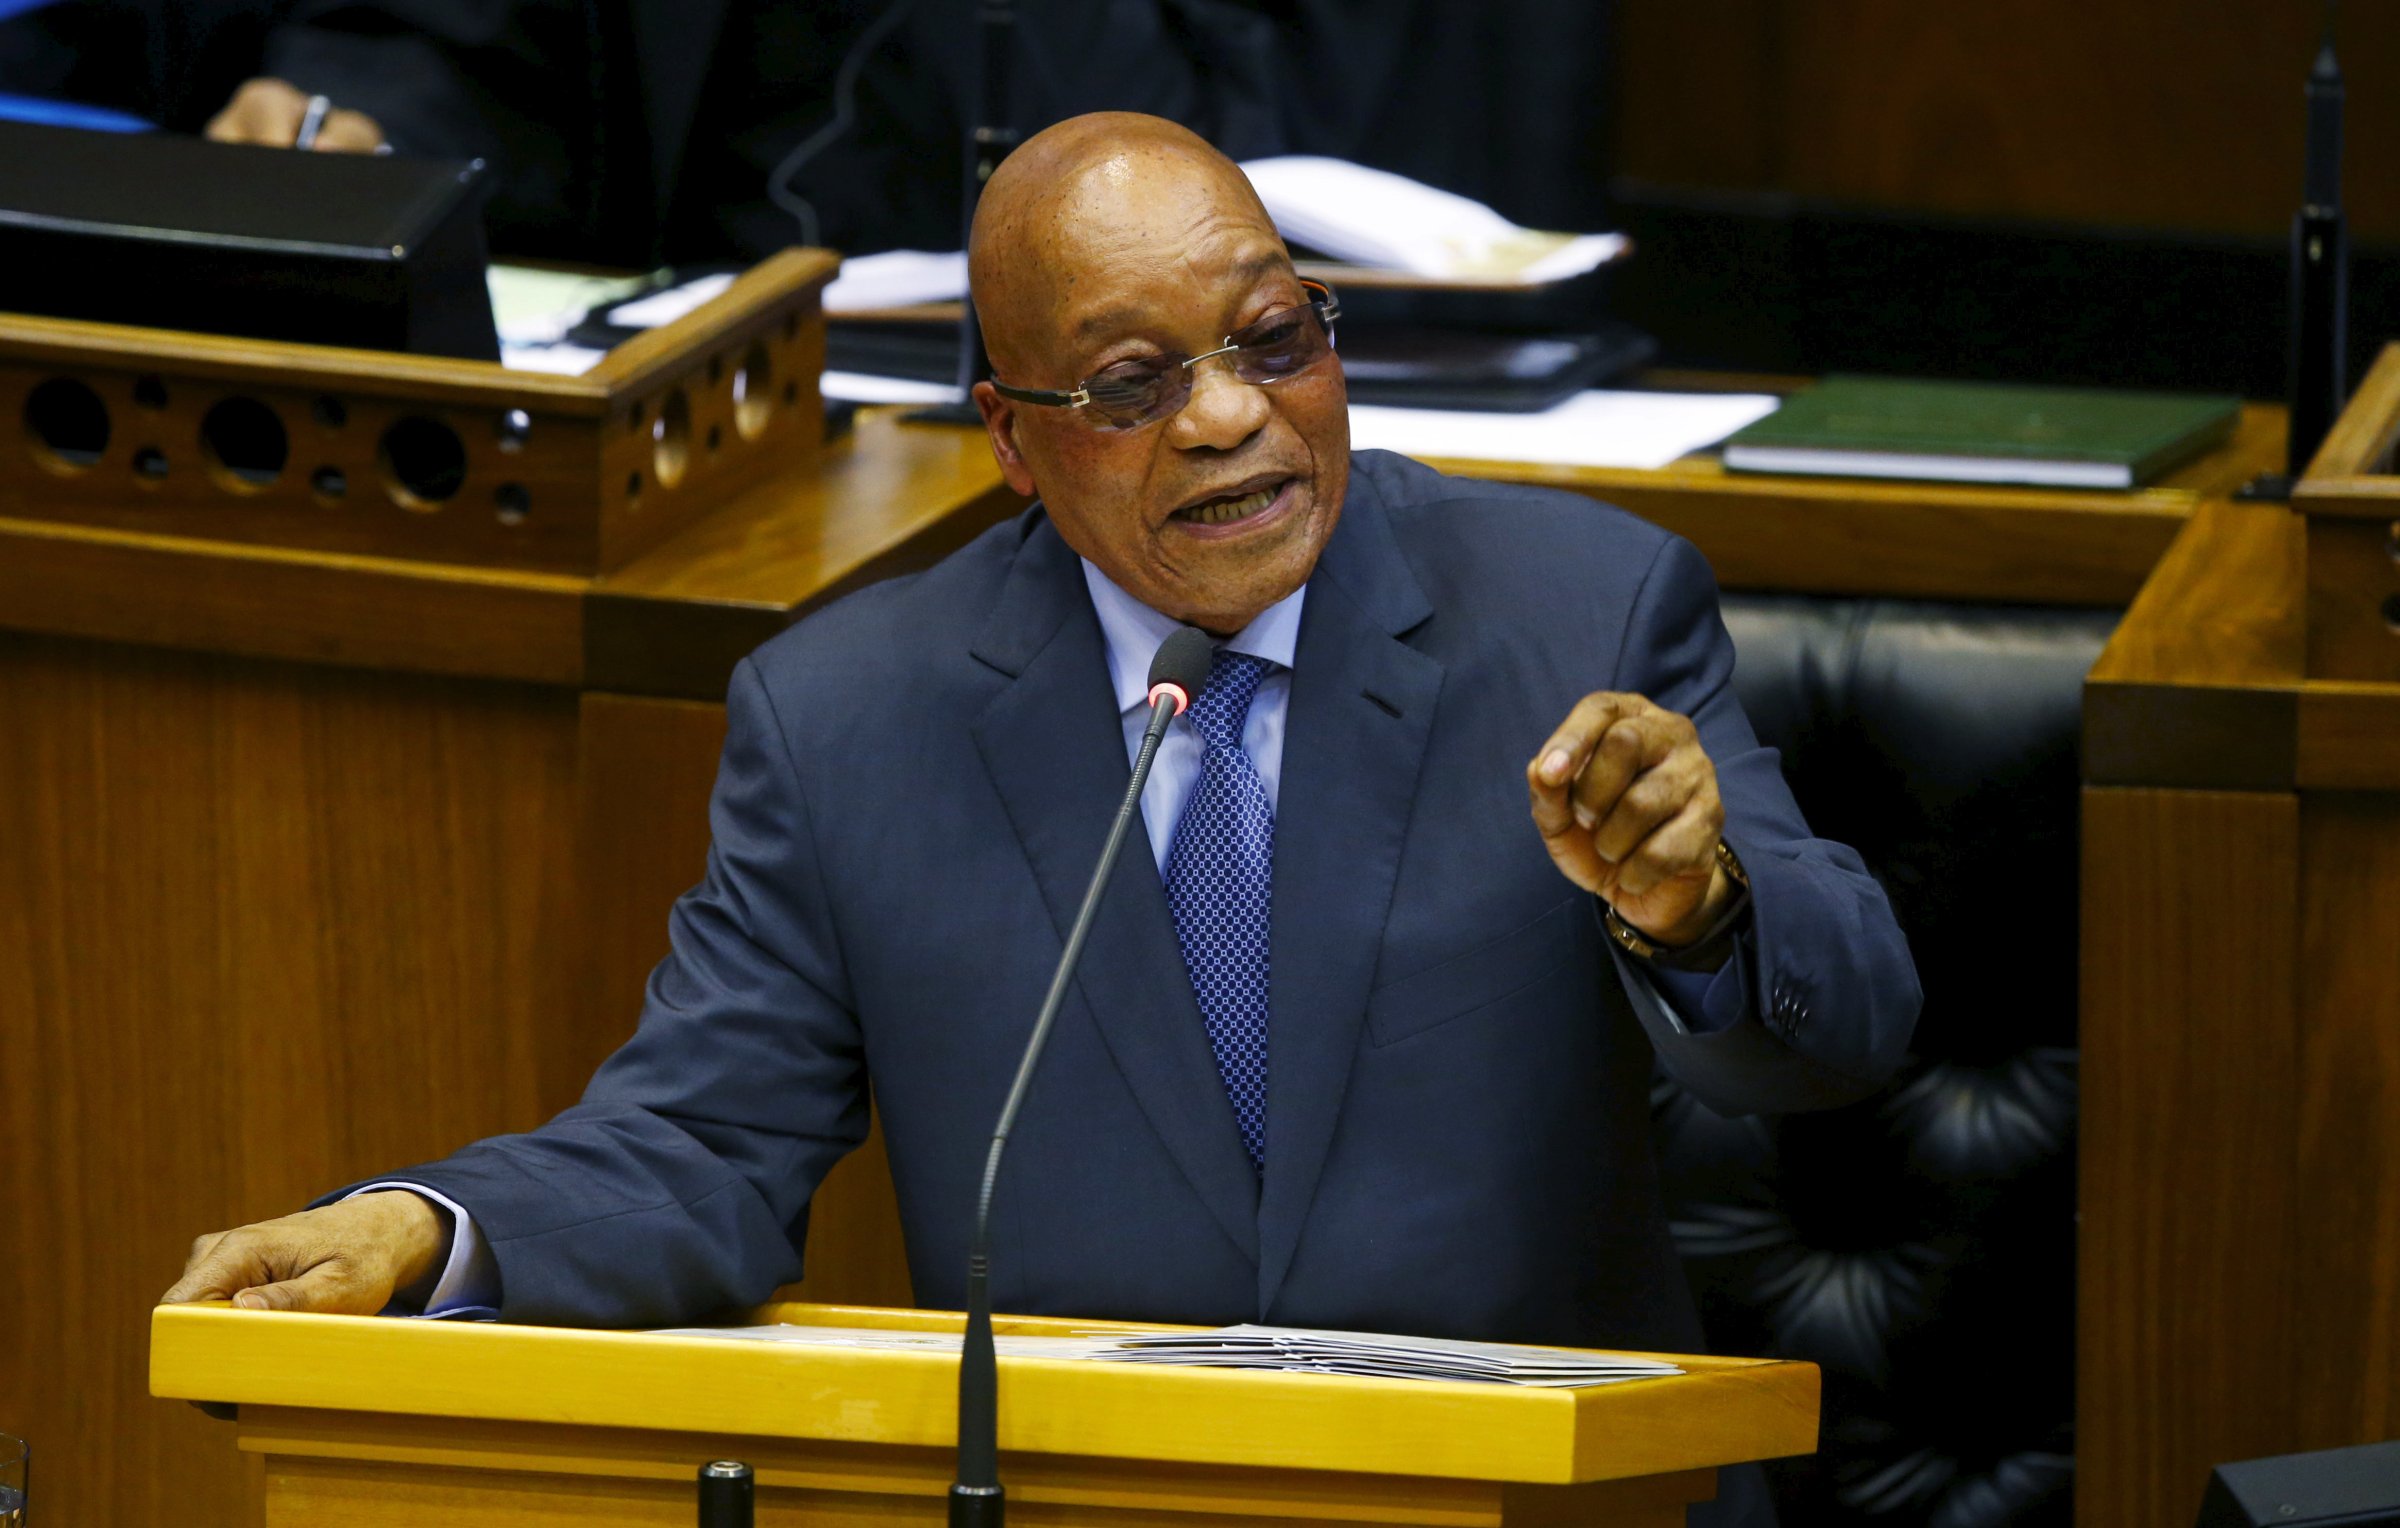 President Jacob Zuma answers questions at Parliament in Cape Town, South Africa, March 17, 2016. A nephew of Zuma's was mentioned in the Panama Papers.